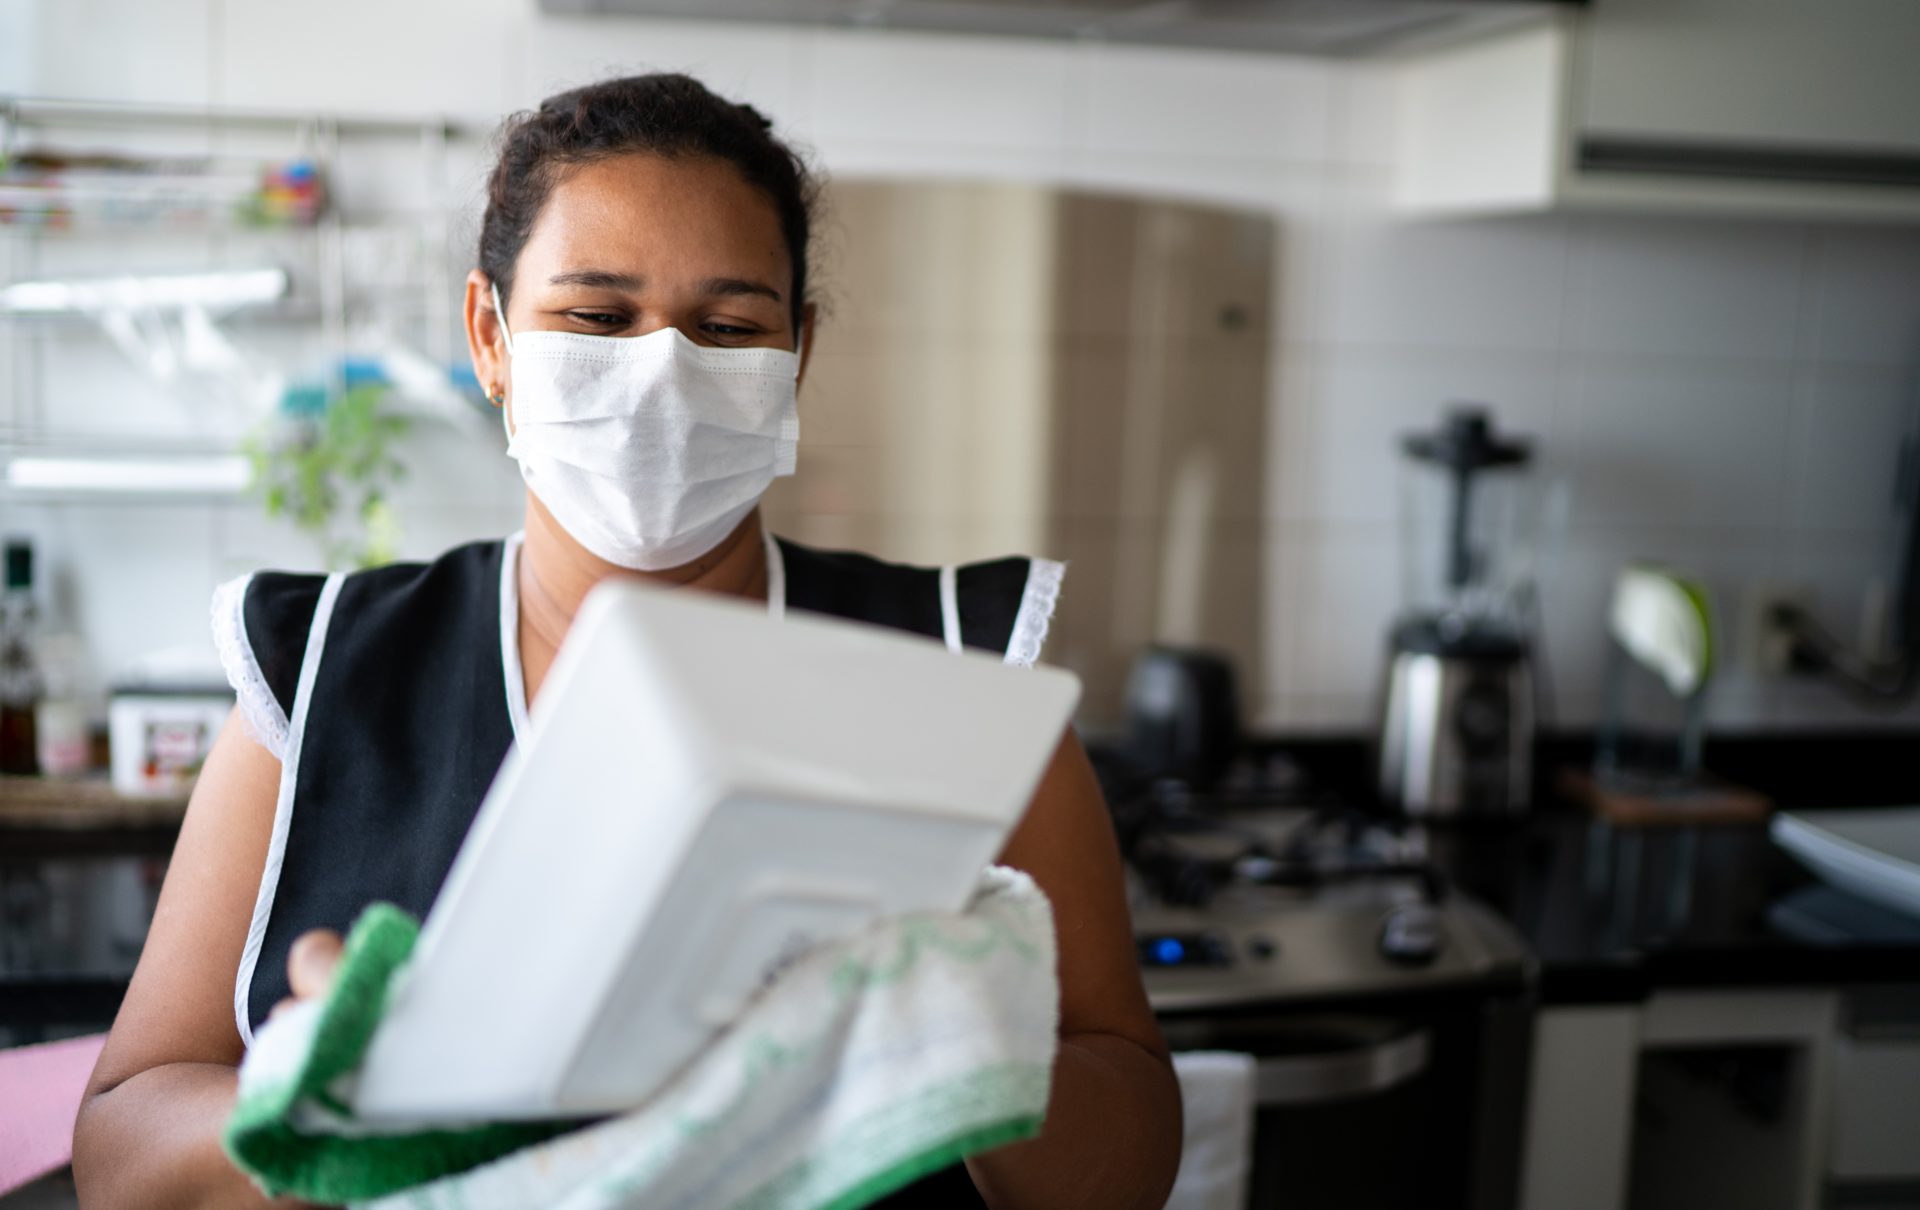 Housekeeper washing the dishes wearing protective mask